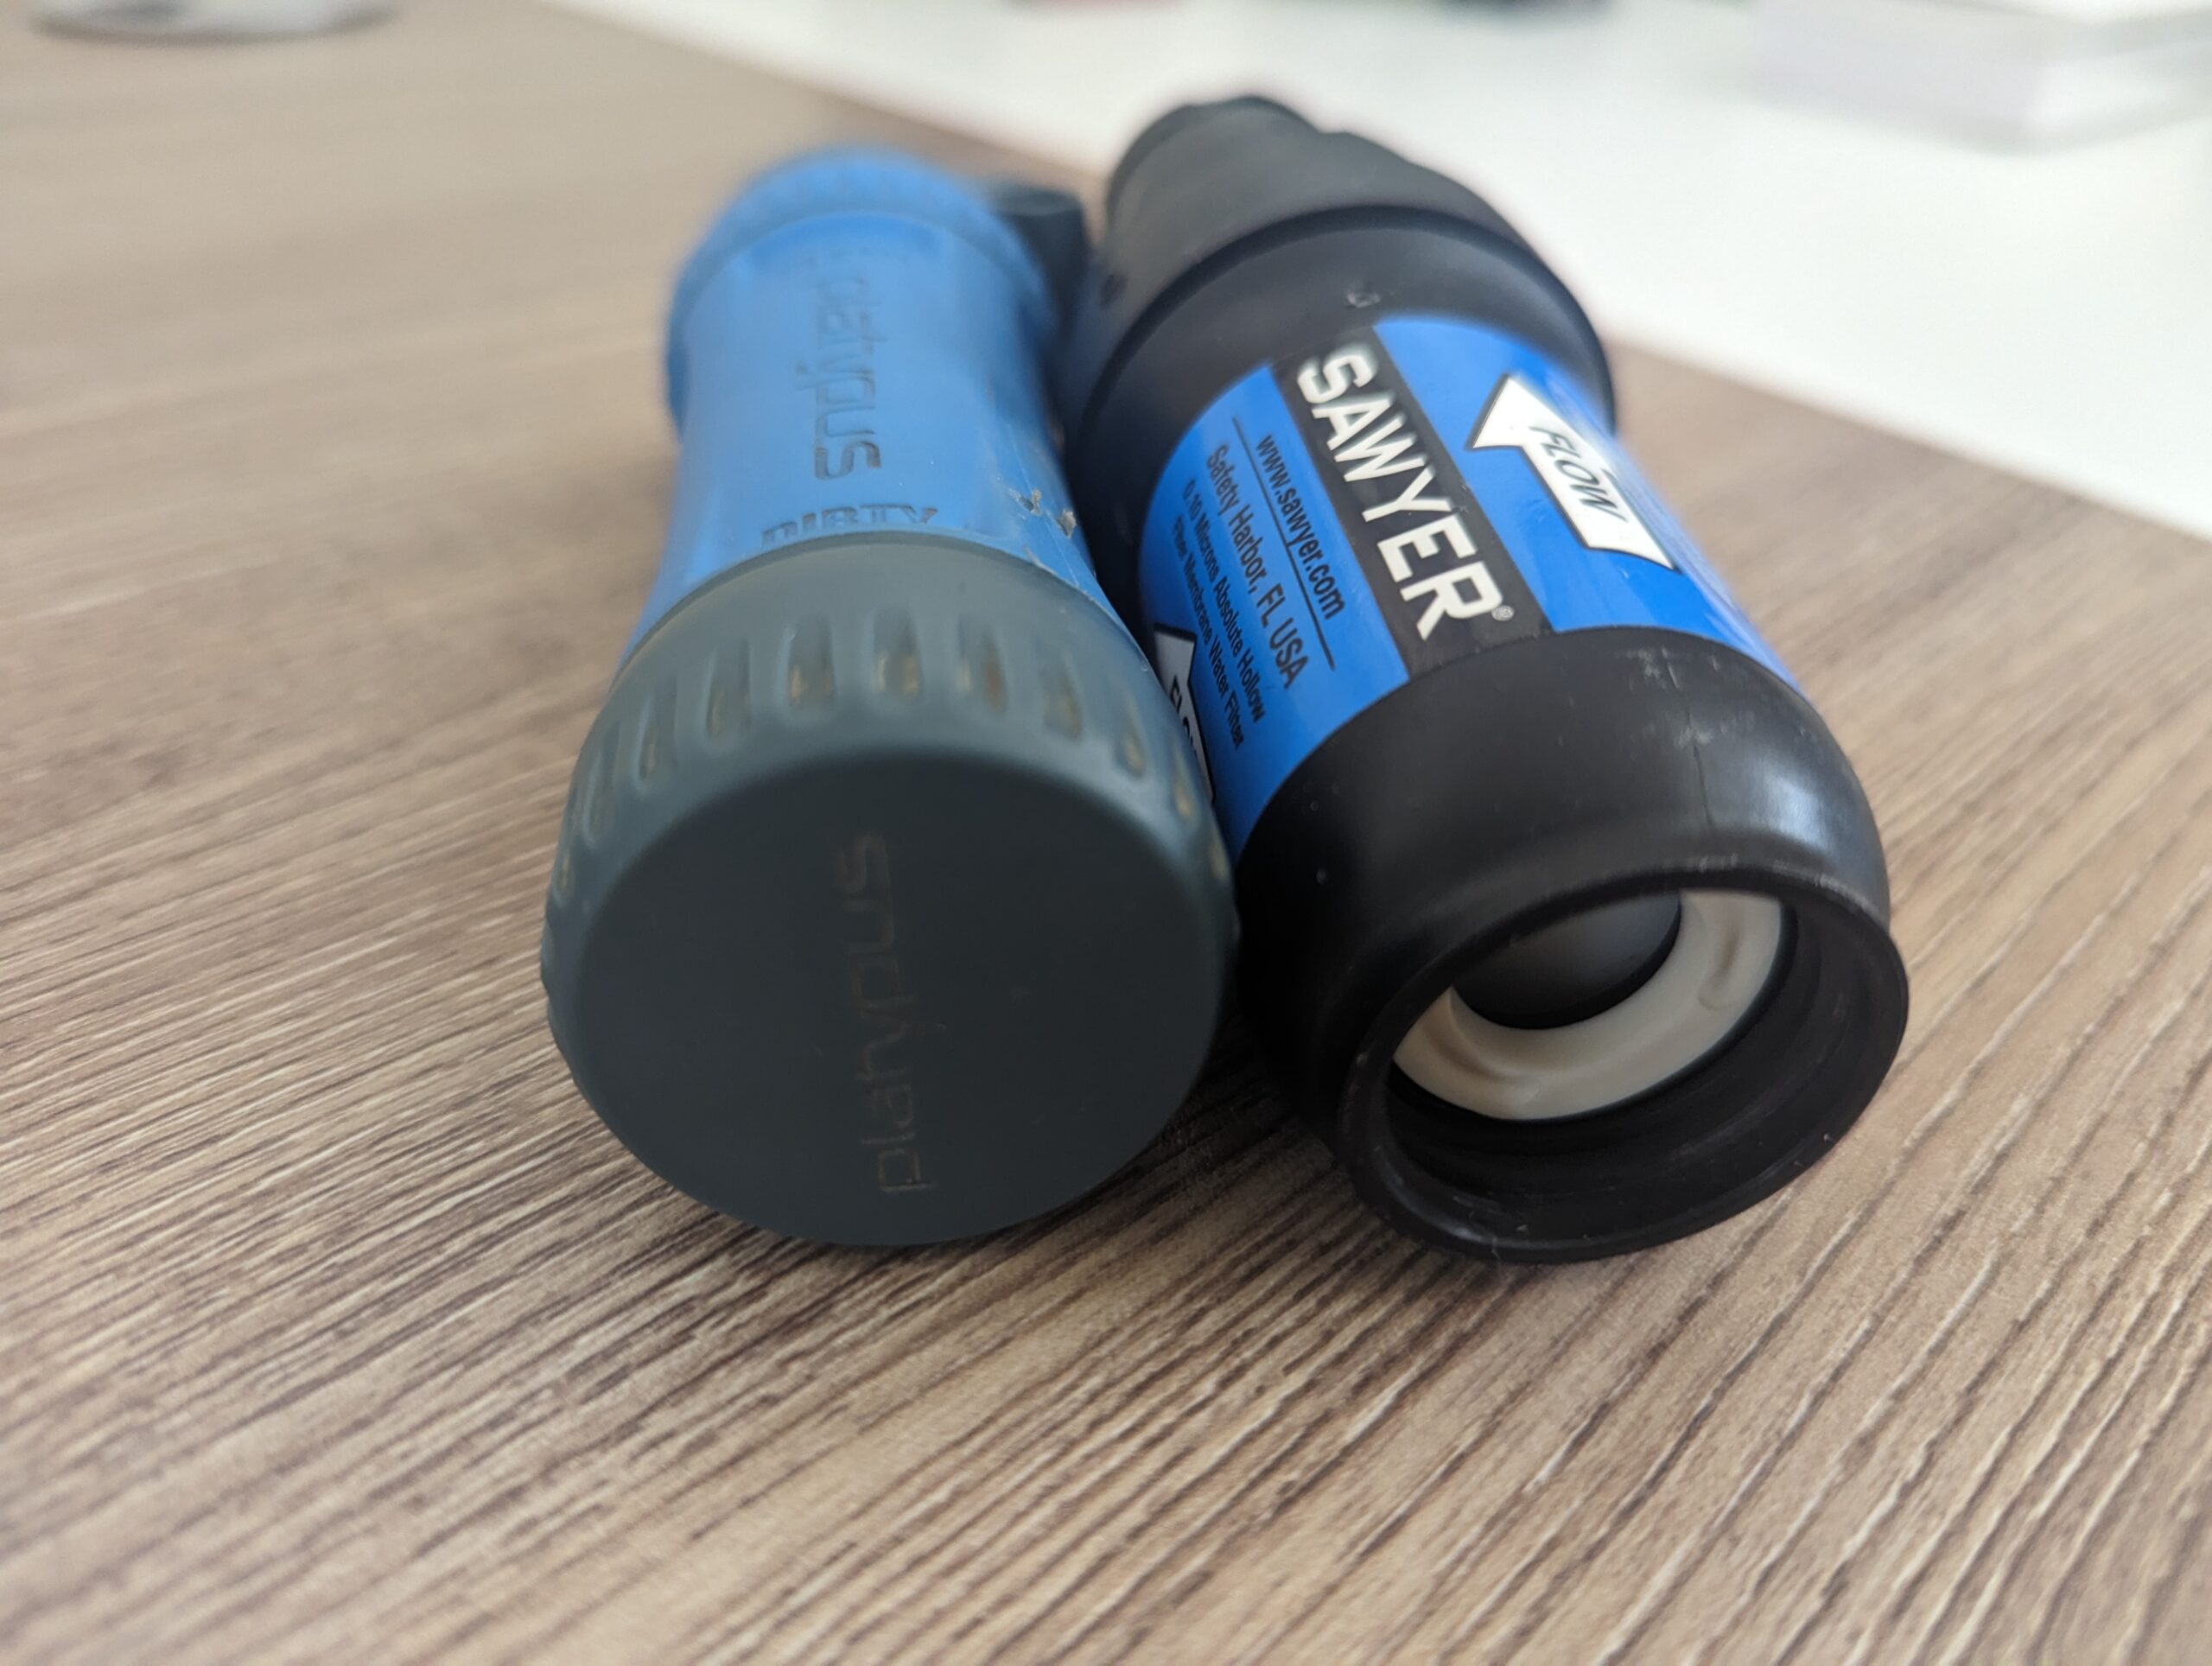 Long-Term Review: Platypus QuickDraw vs Sawyer Squeeze Water Filters